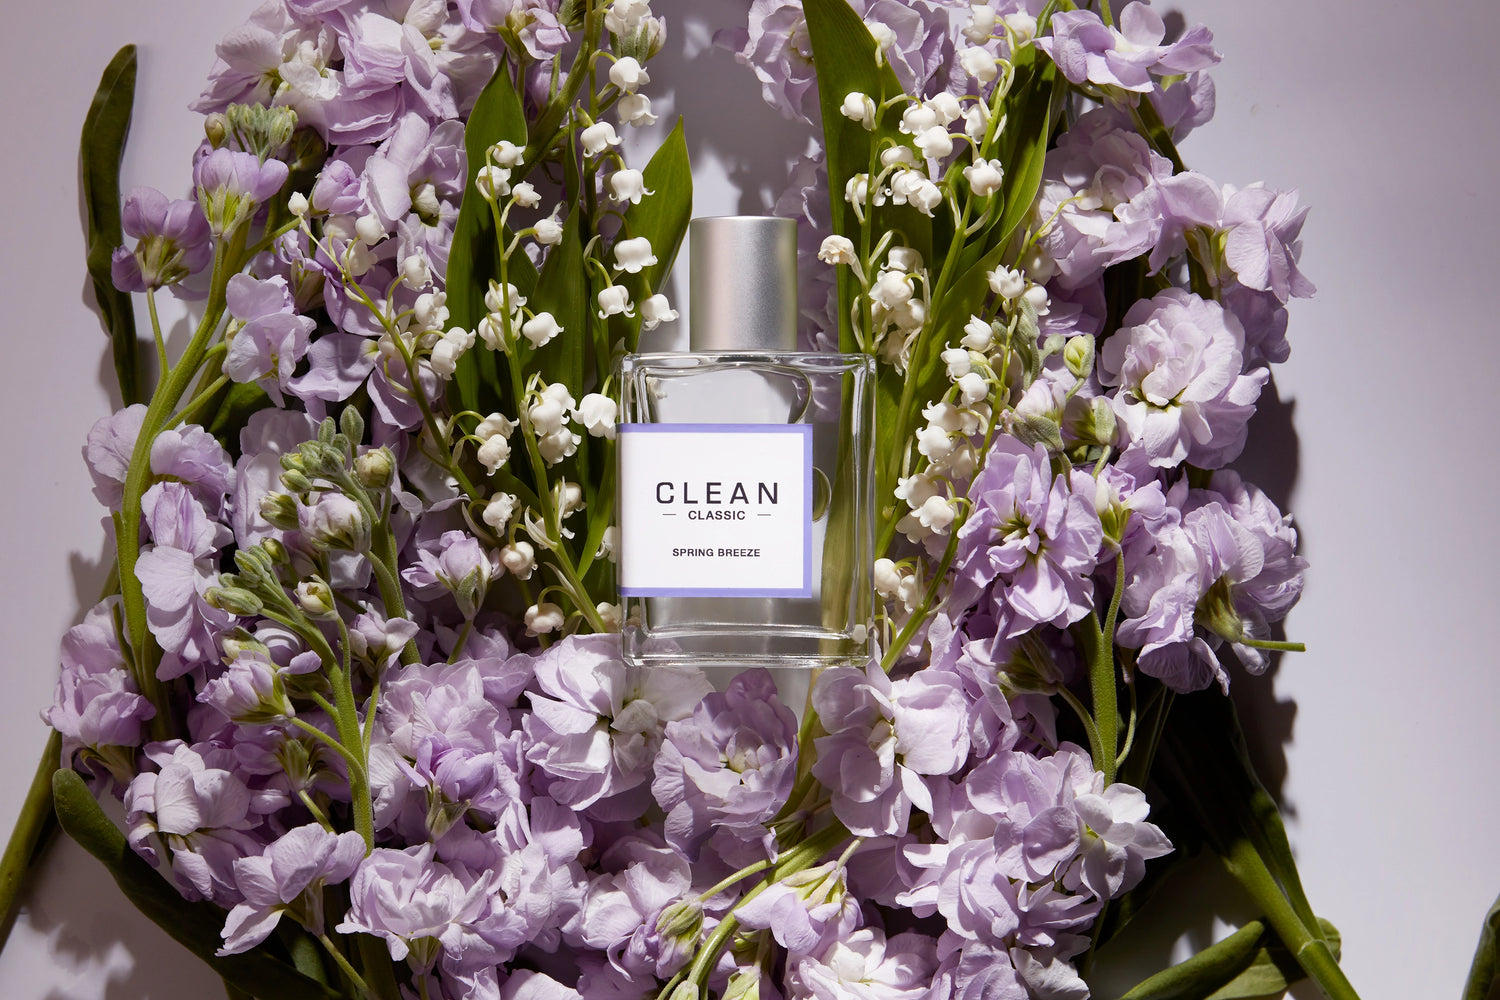 Introducing CLEAN CLASSIC Spring Breeze